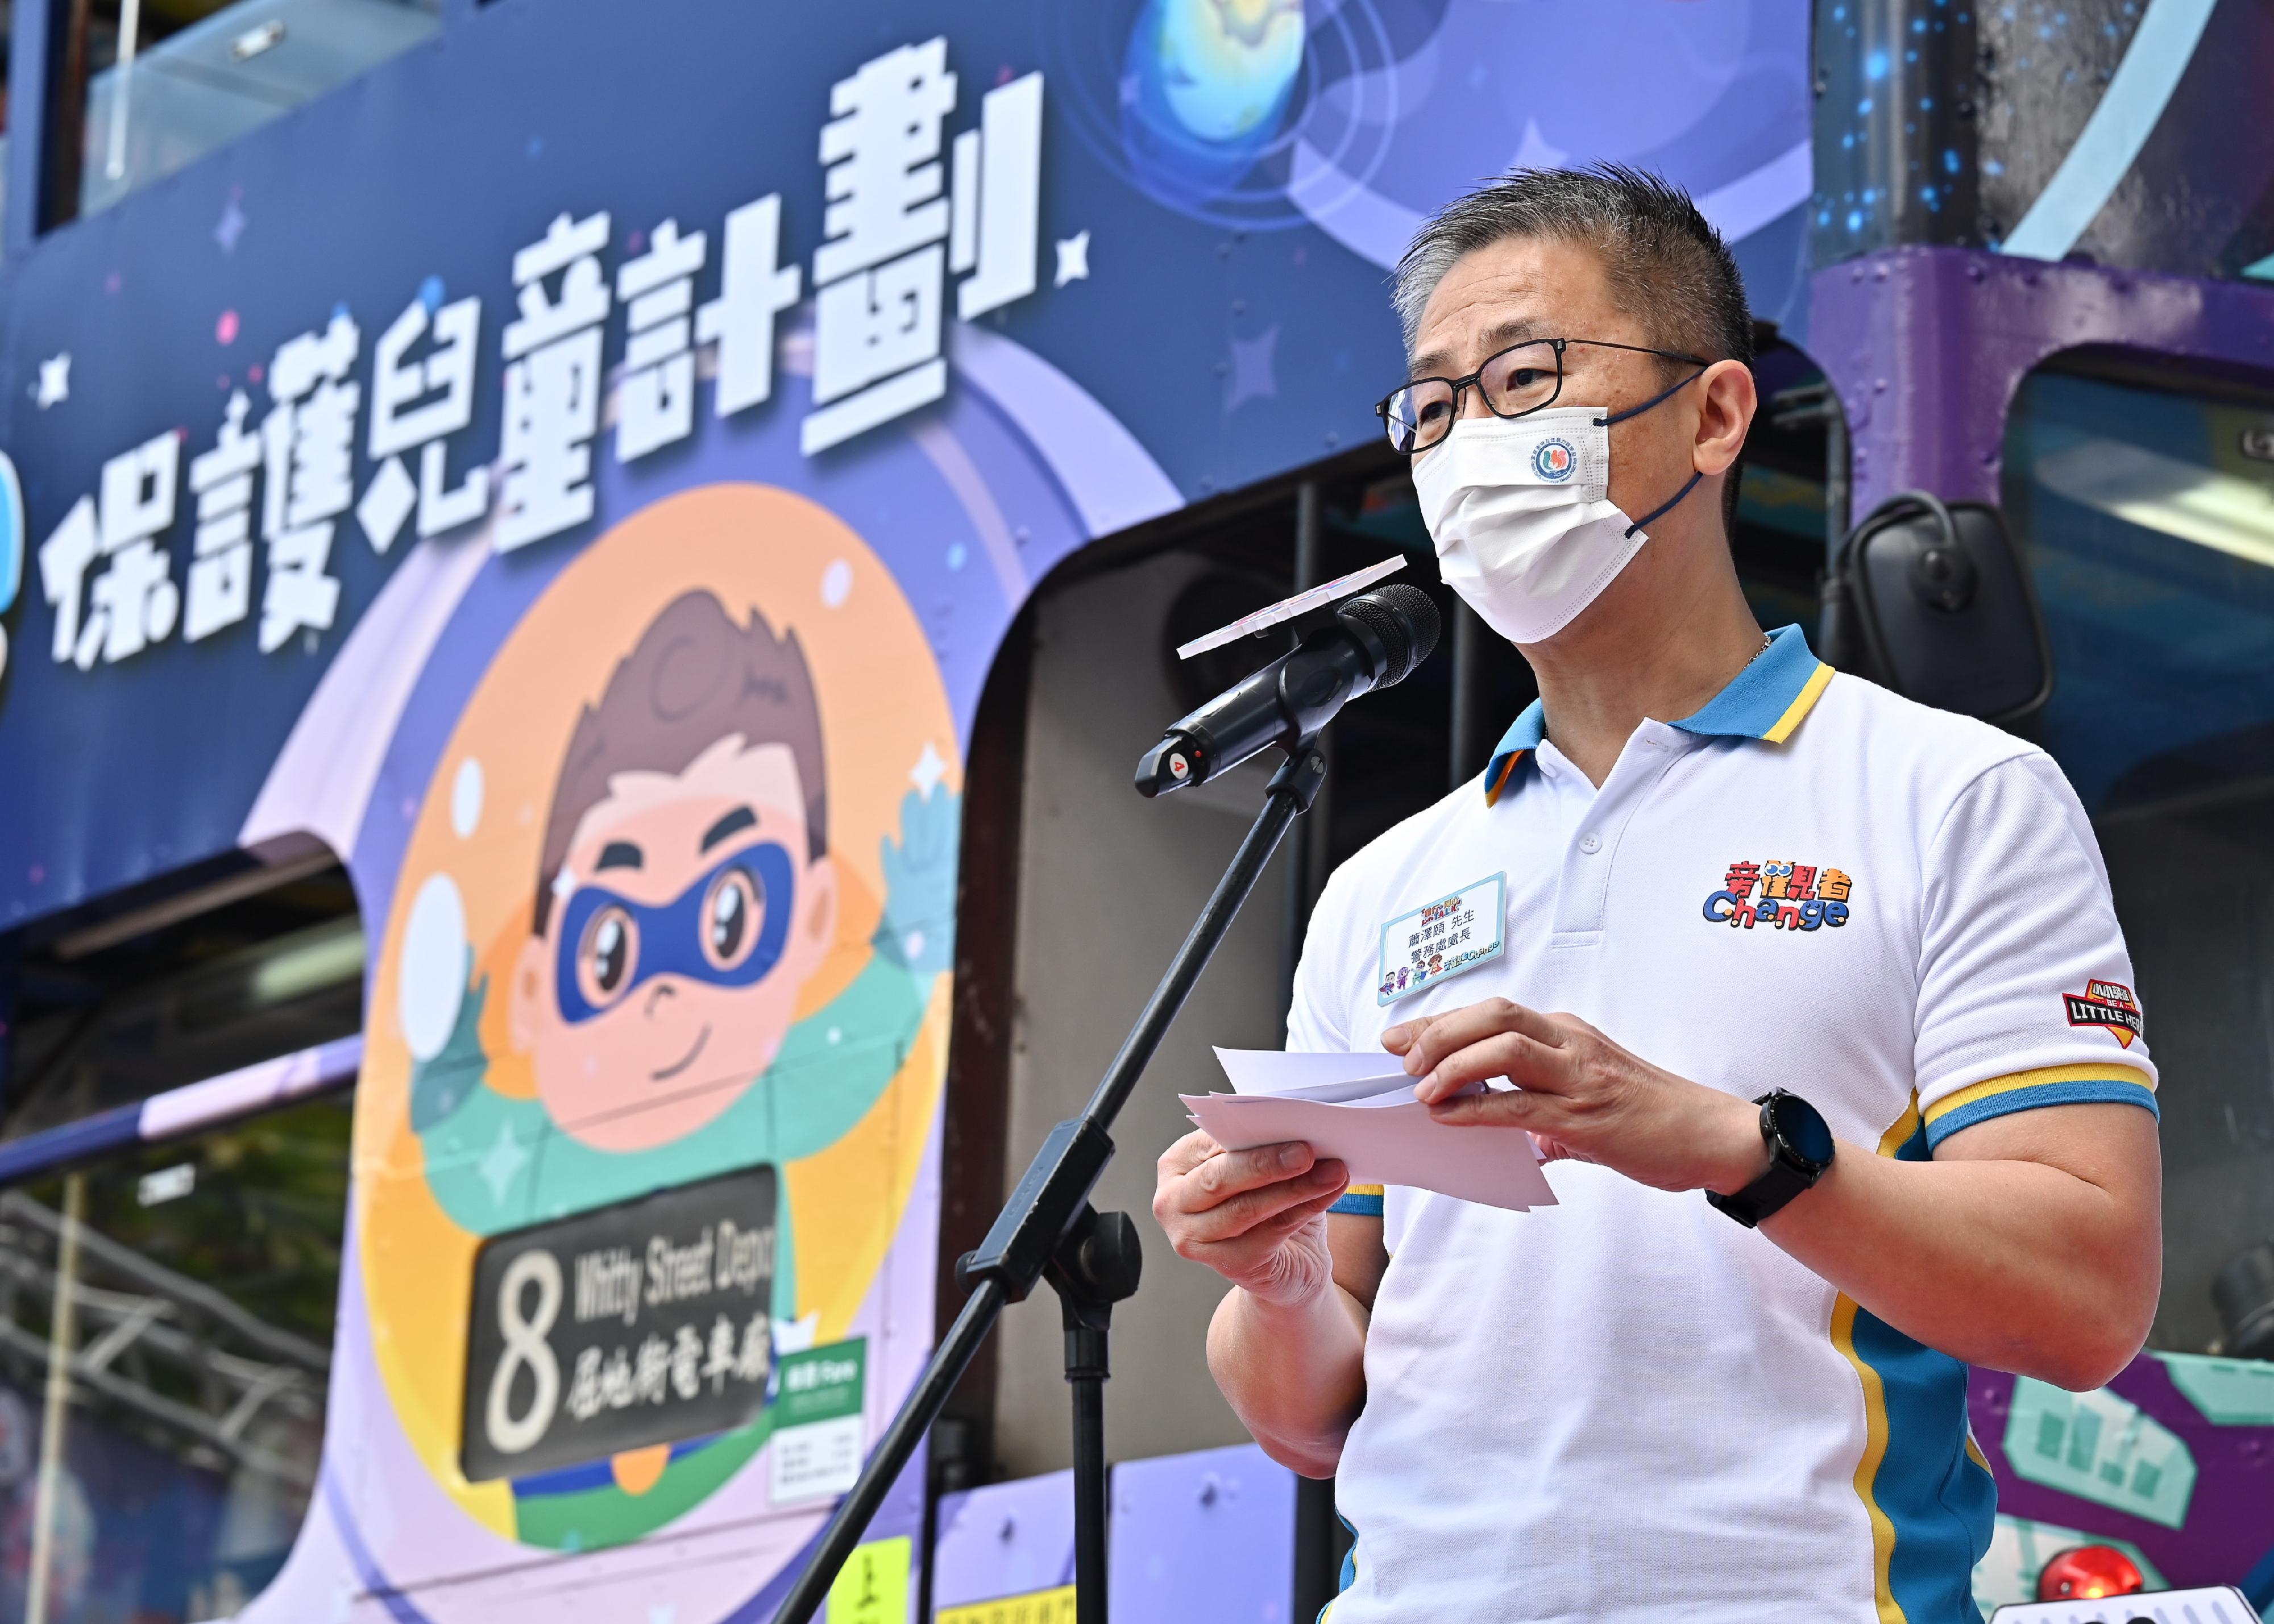 "Let's T.A.L.K. - Child Protection Campaign 2022" kicks off today (October 14). Photo shows the Commissioner of Police, Mr Siu Chak-yee, delivering a speech at the opening ceremony.